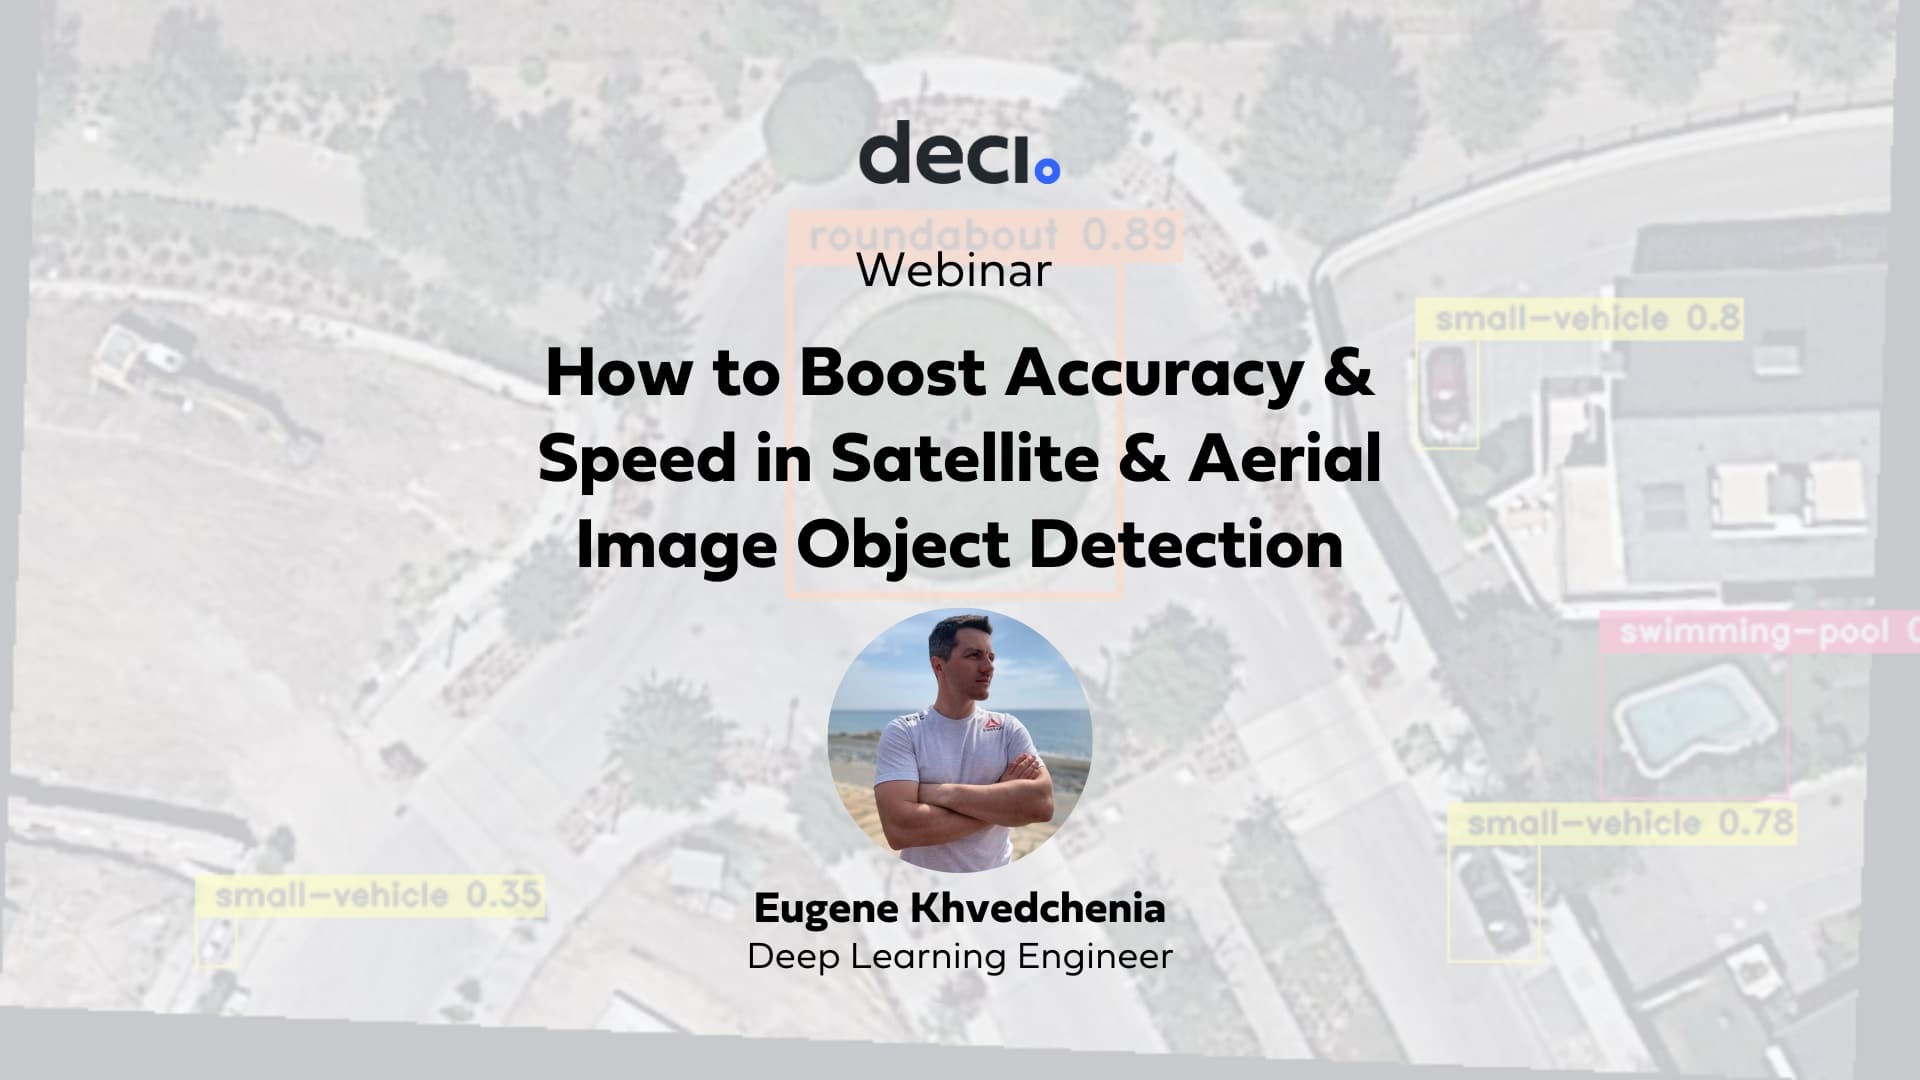 deci-small-object-detection-webinar-featured